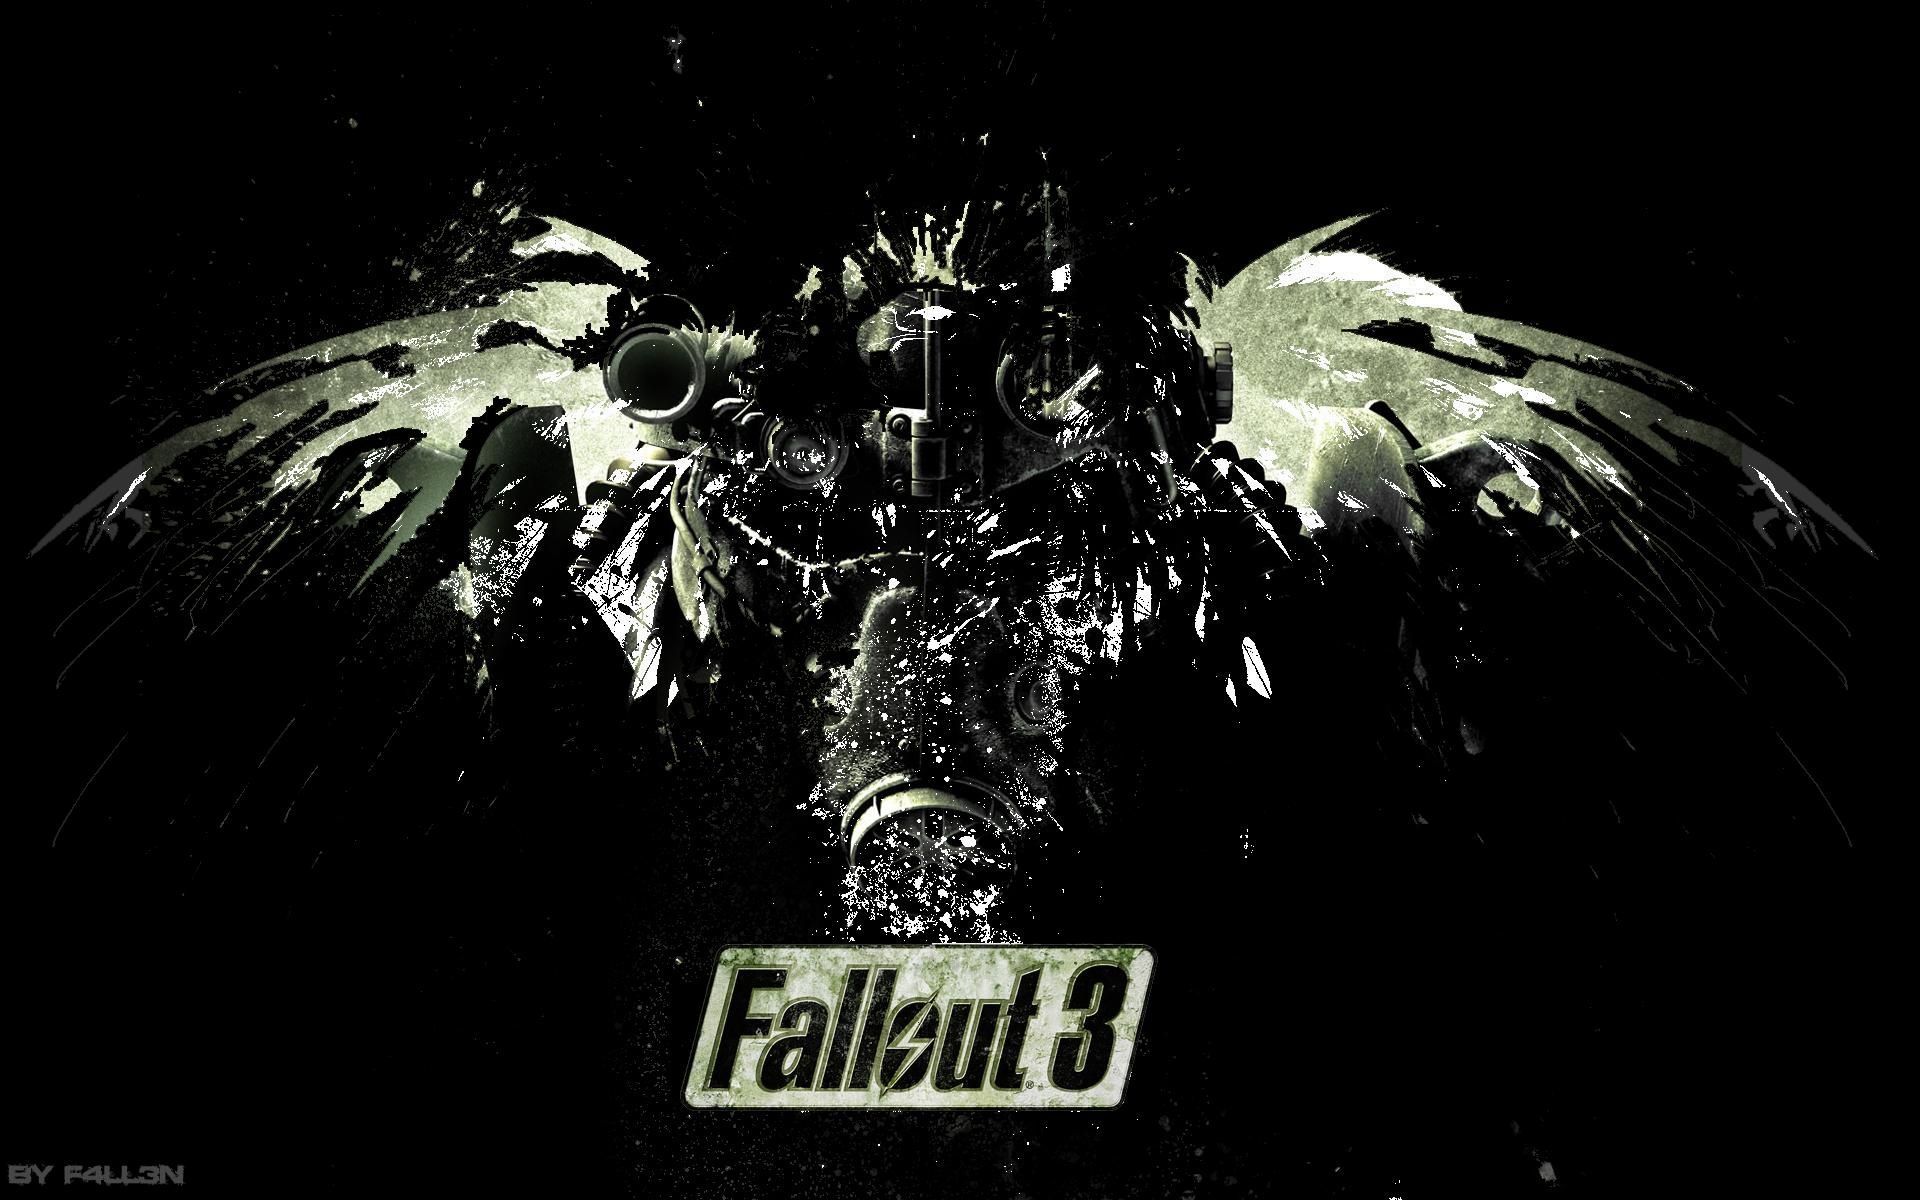 Fallout 3 Wallpapers | Best Wallpapers